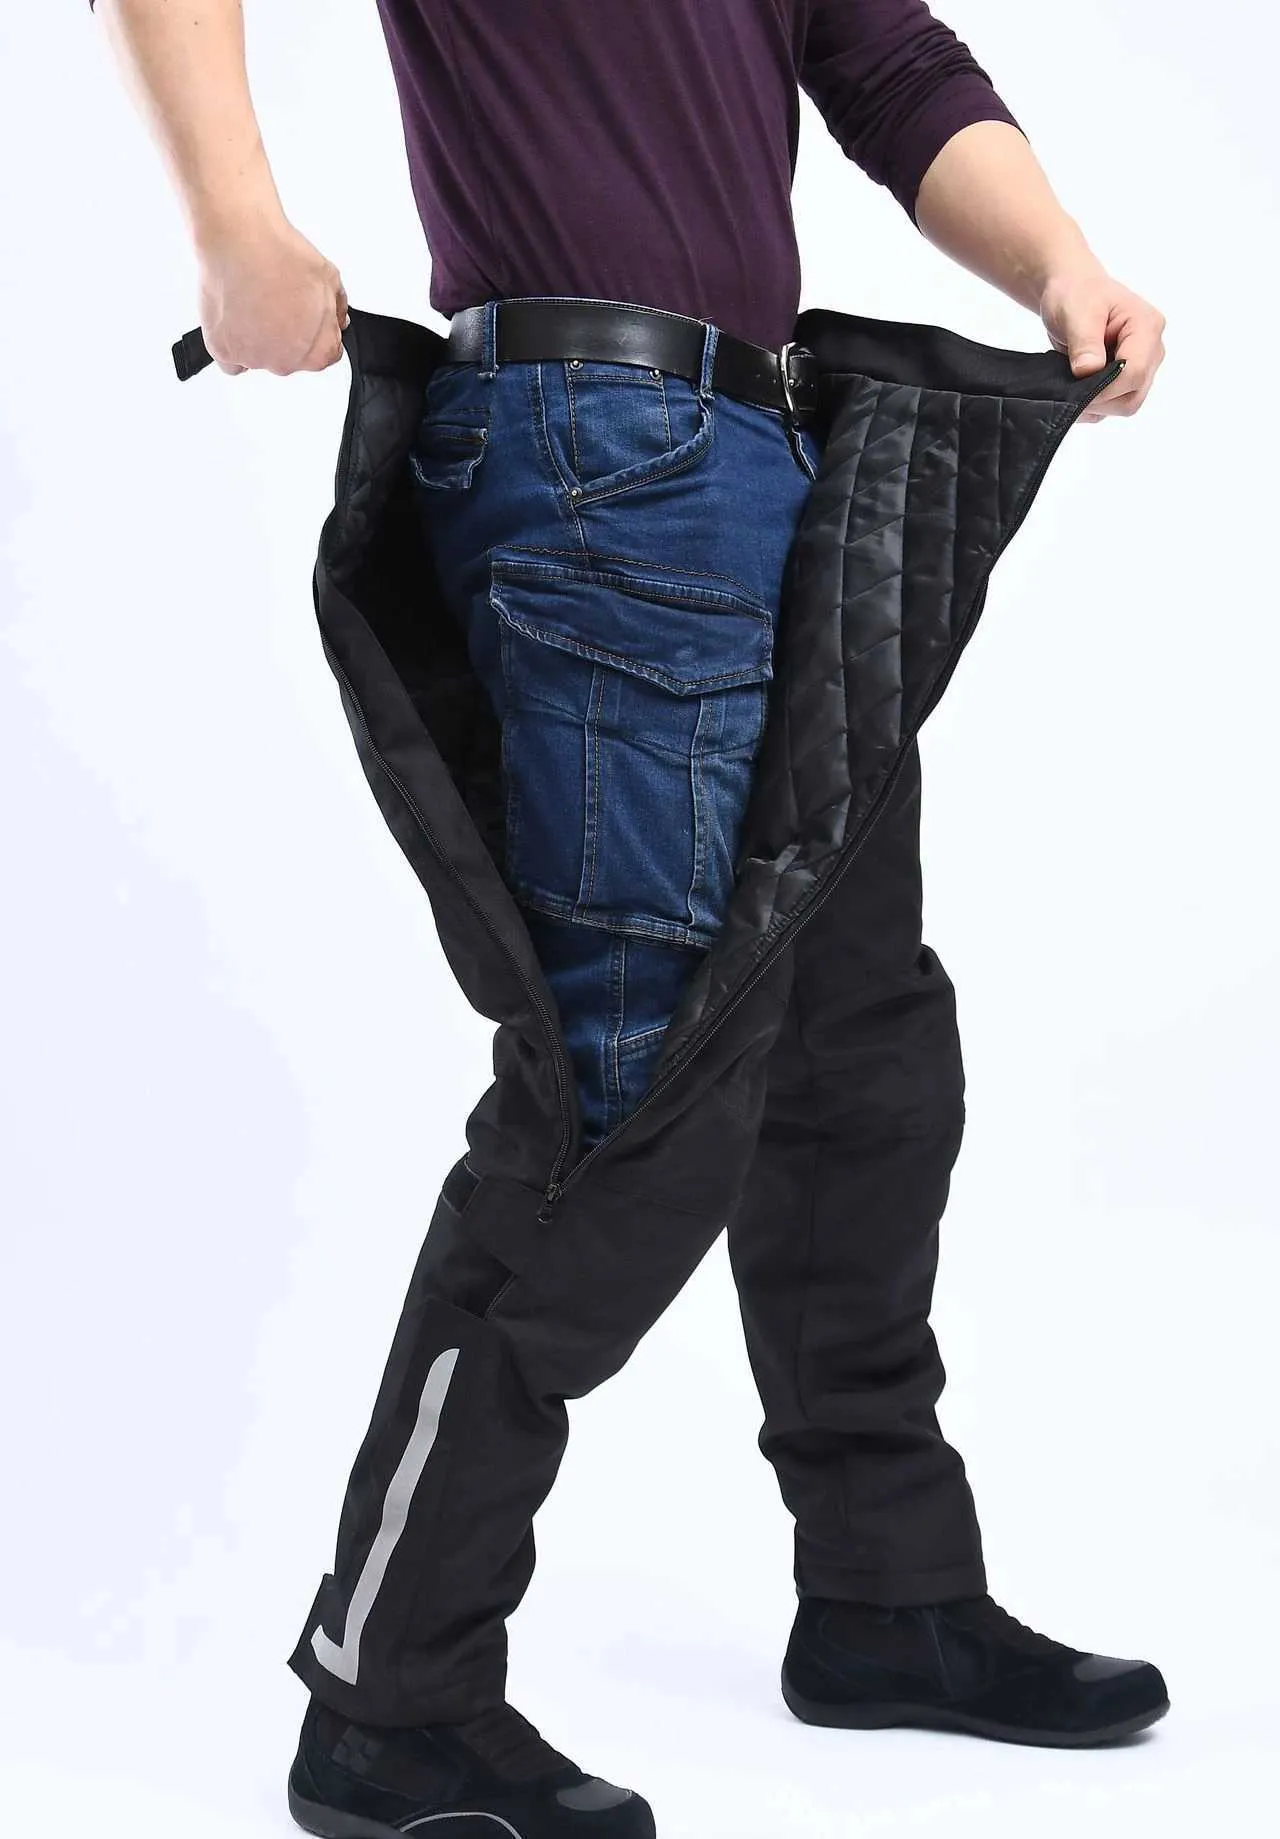 CE Approved Winter Motorcycle Pants Quick Release Moto Pants Men